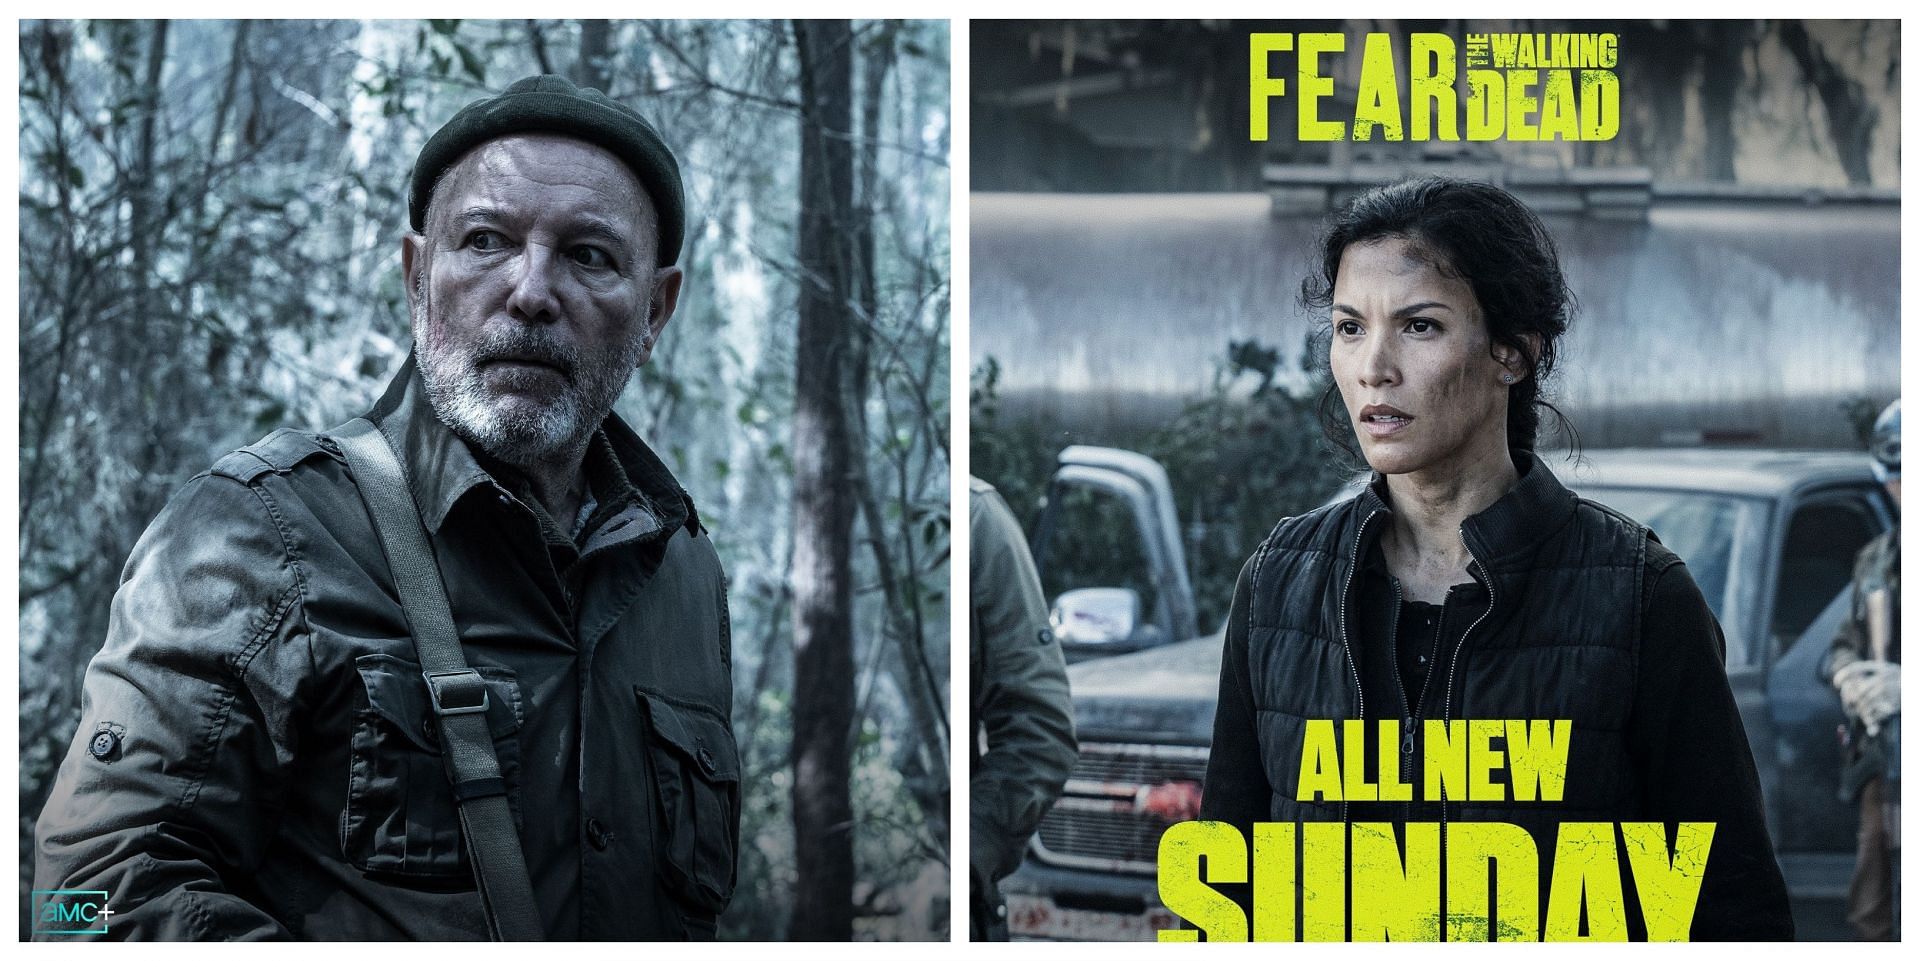 Rub&eacute;n Blades and Danay Garcia (Pictures sourced from official Facebook page)